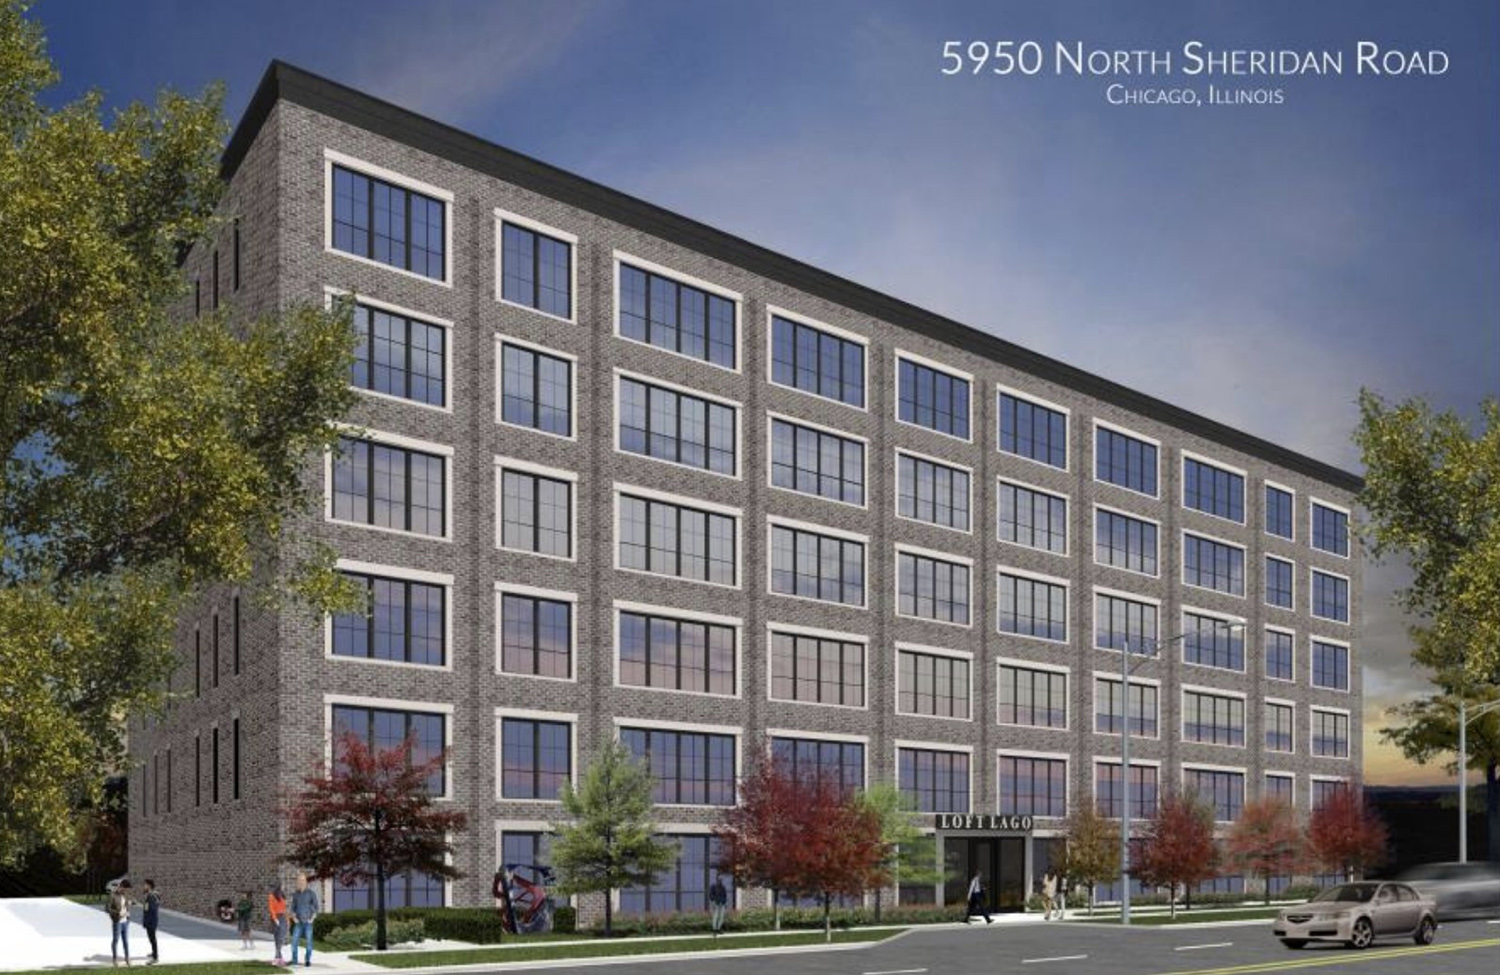 Previous Design of 5950 N Sheridan Road. Rendering by Hanna Architects